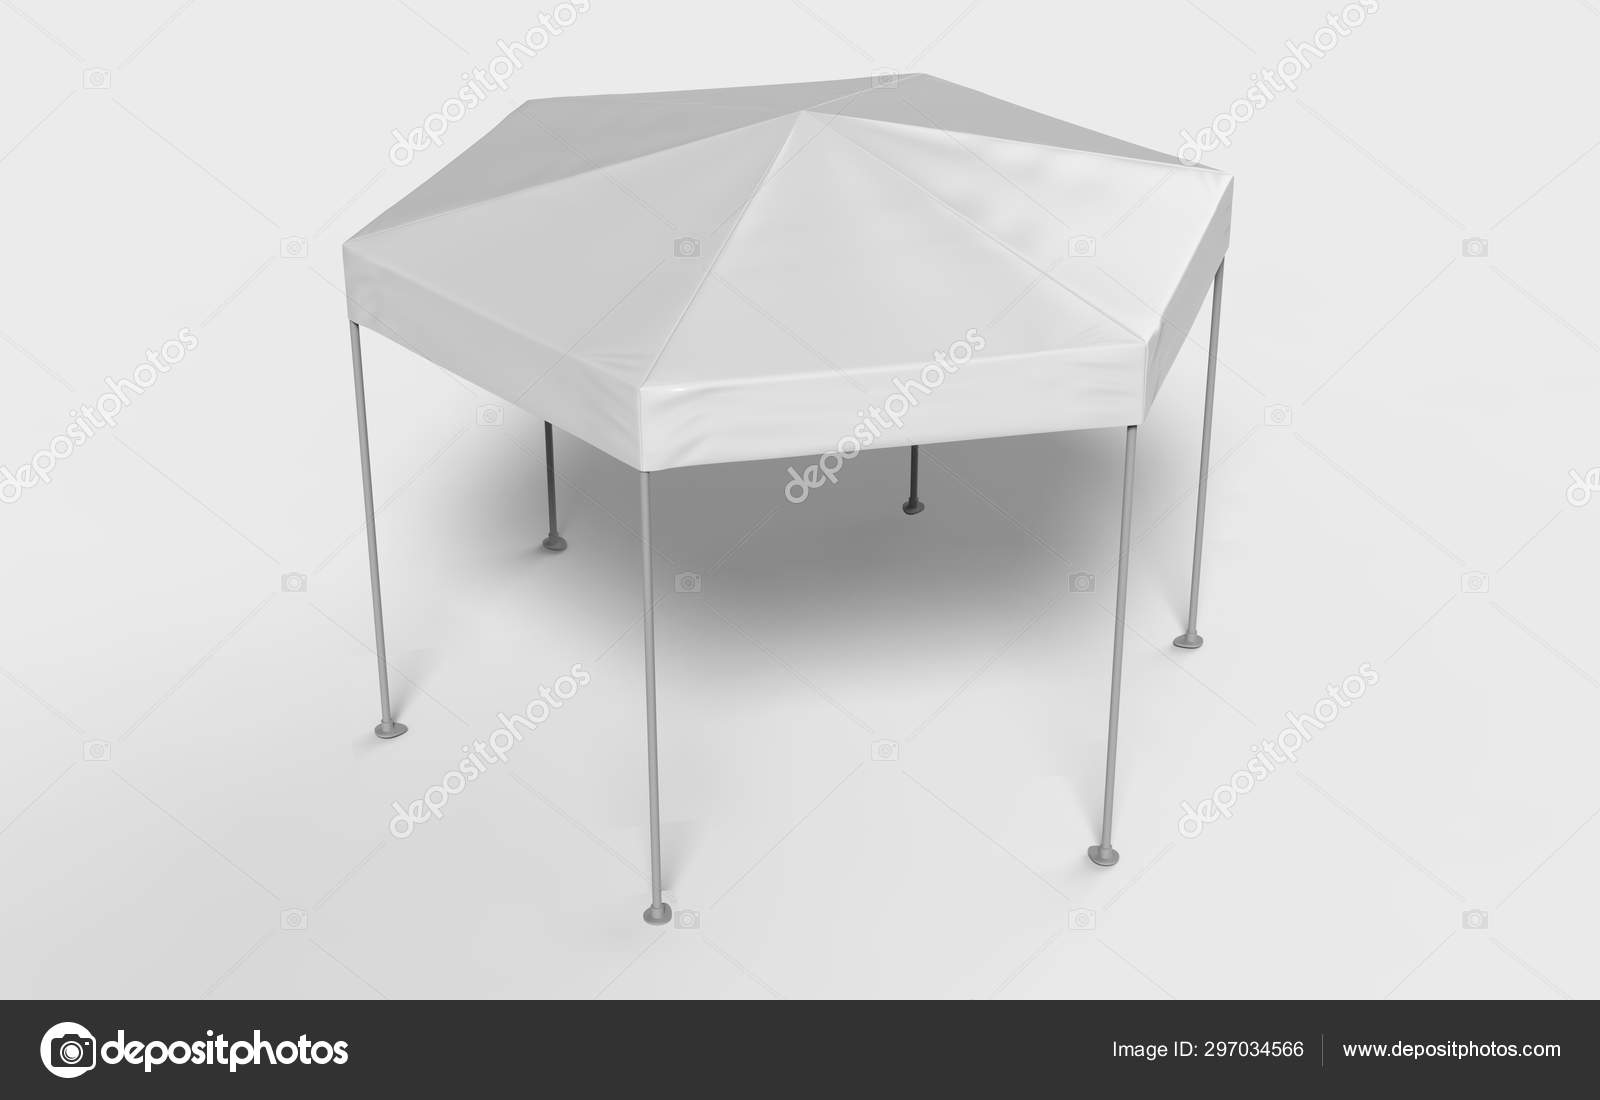 Promotional Six Sides Advertising Outdoor Event Trade Show Canopy